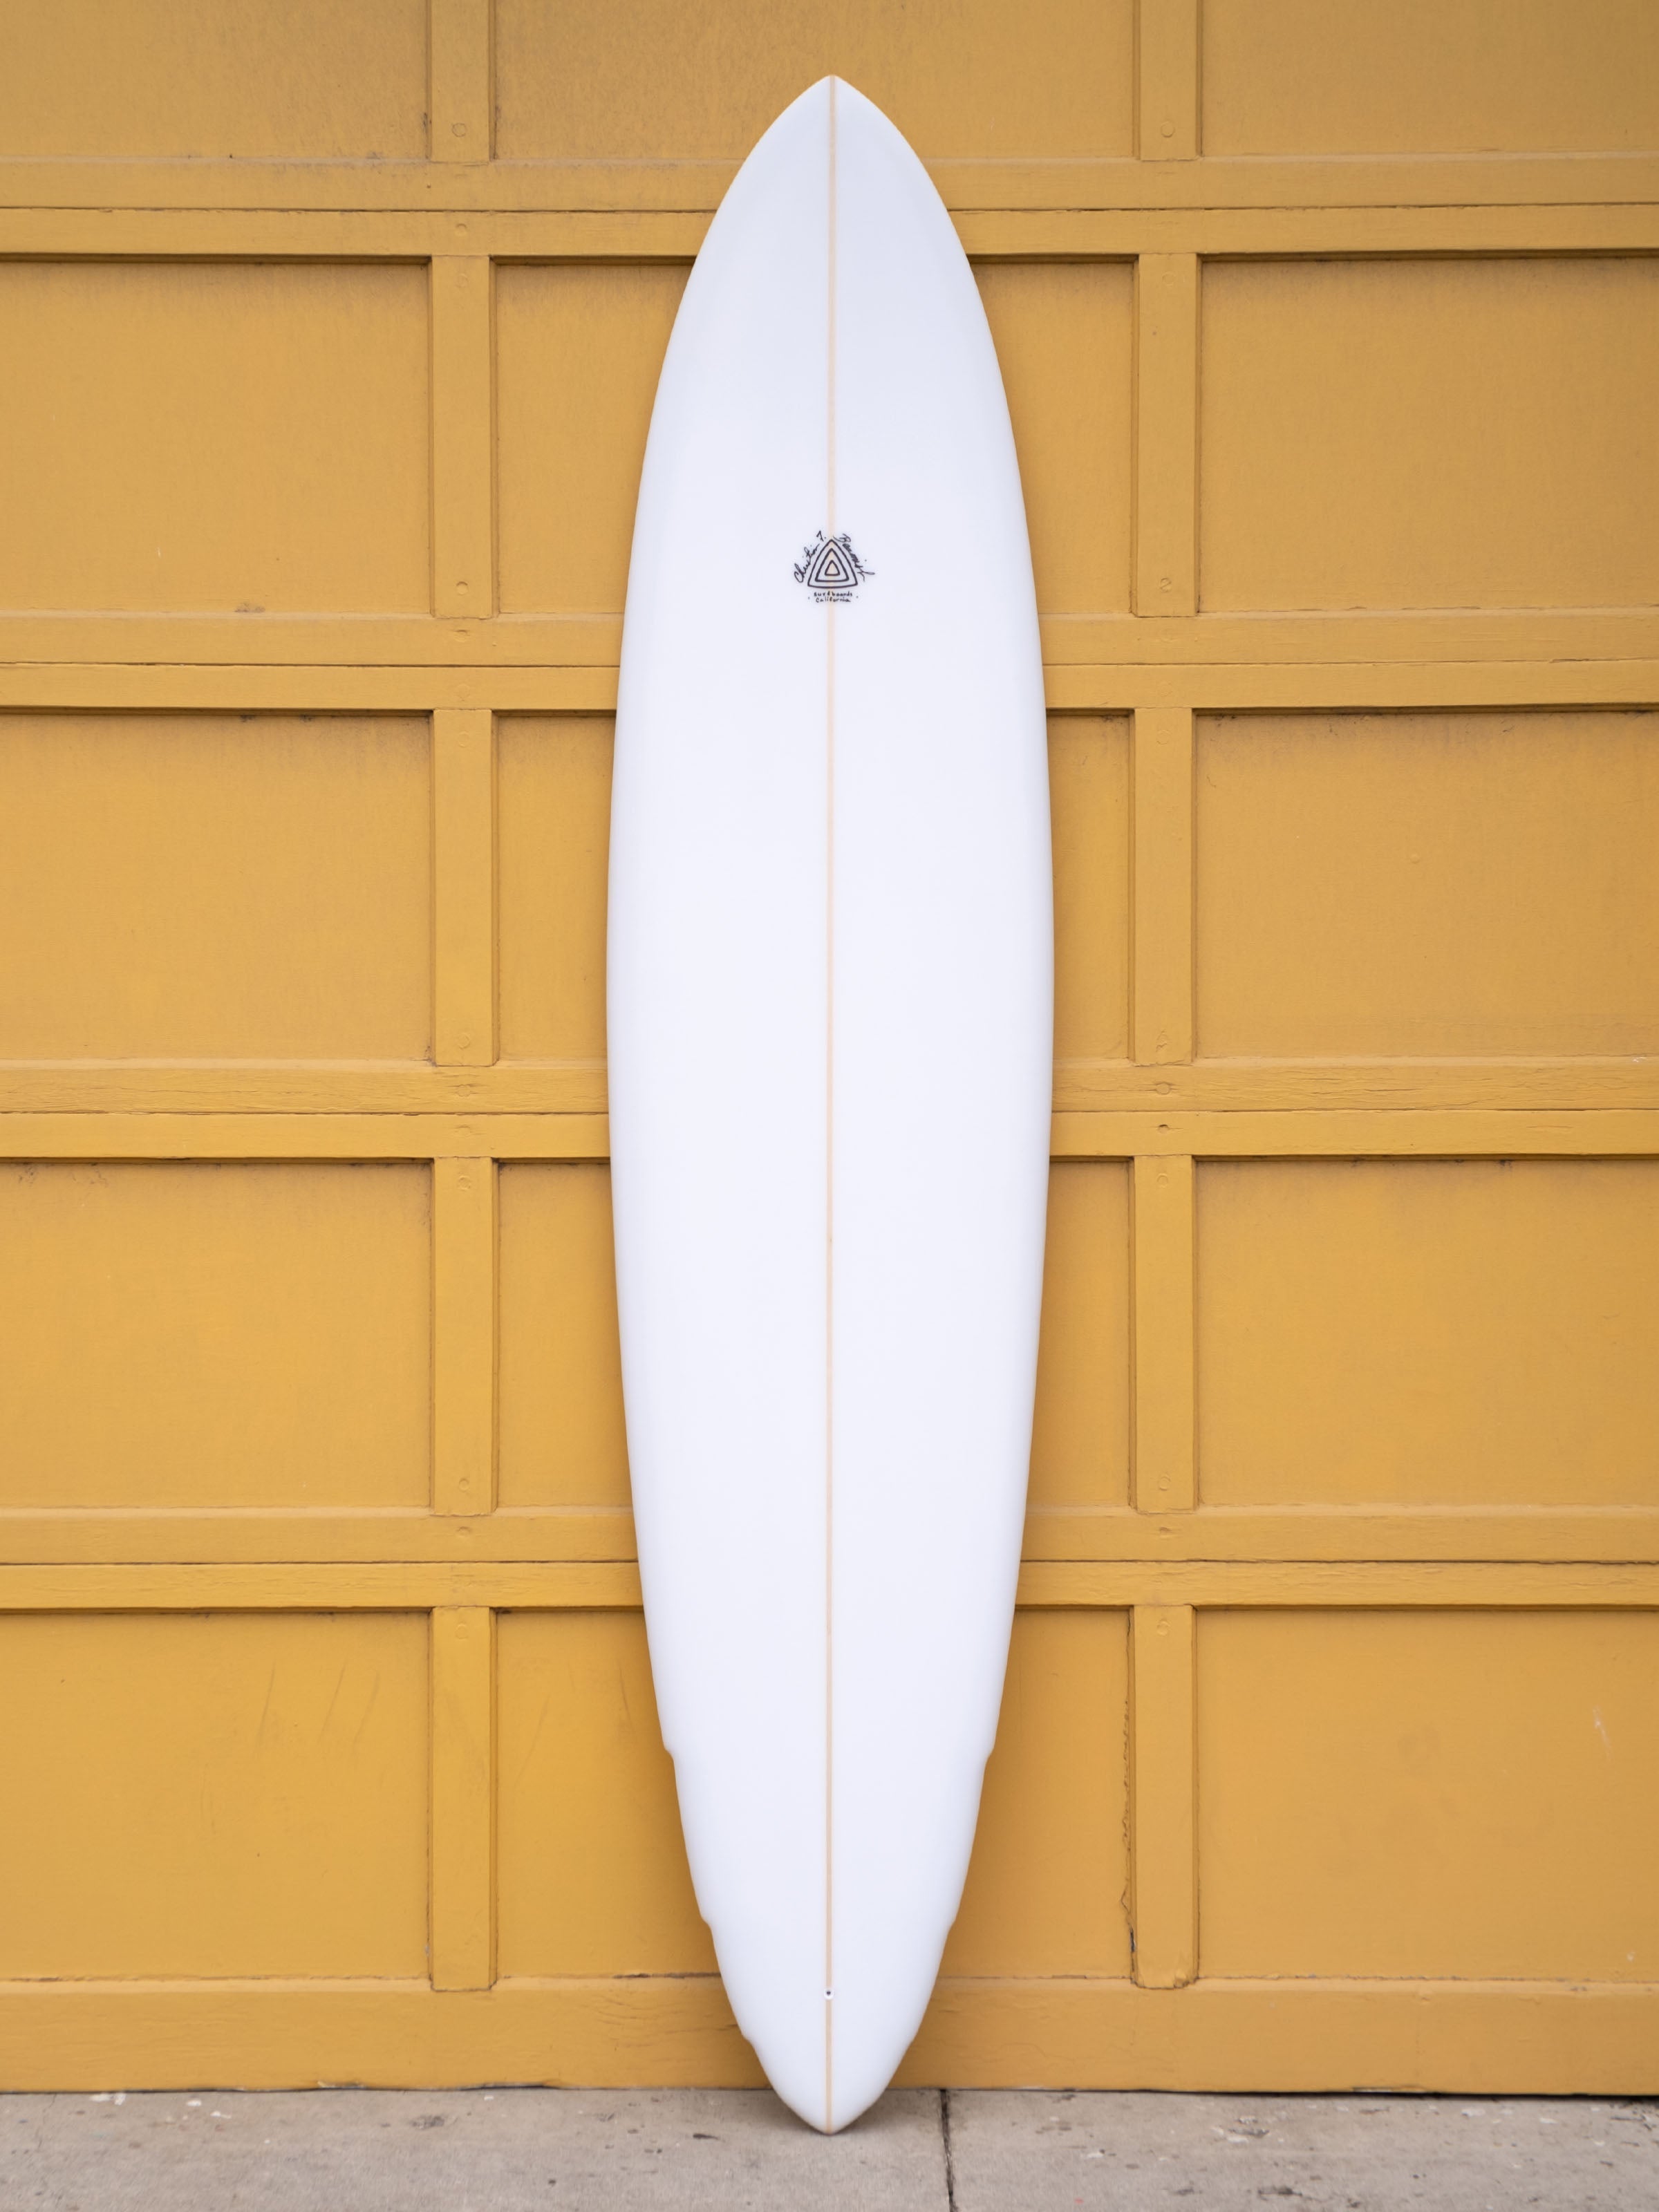 Available Surfboards